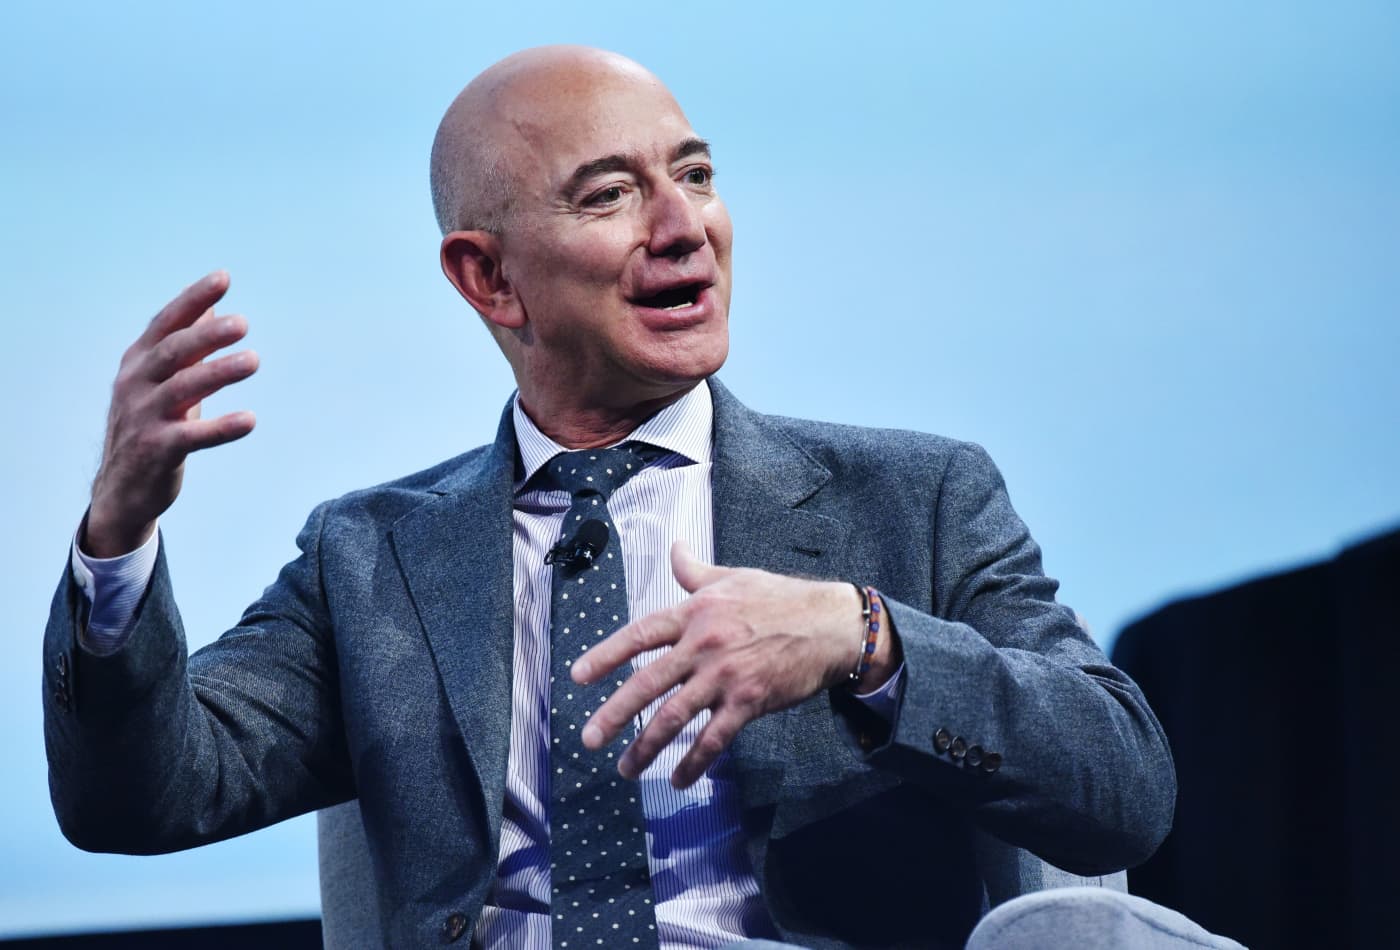 The math behind Jeff Bezos' 8 hours of sleep—and why 4 hours isn't worth it